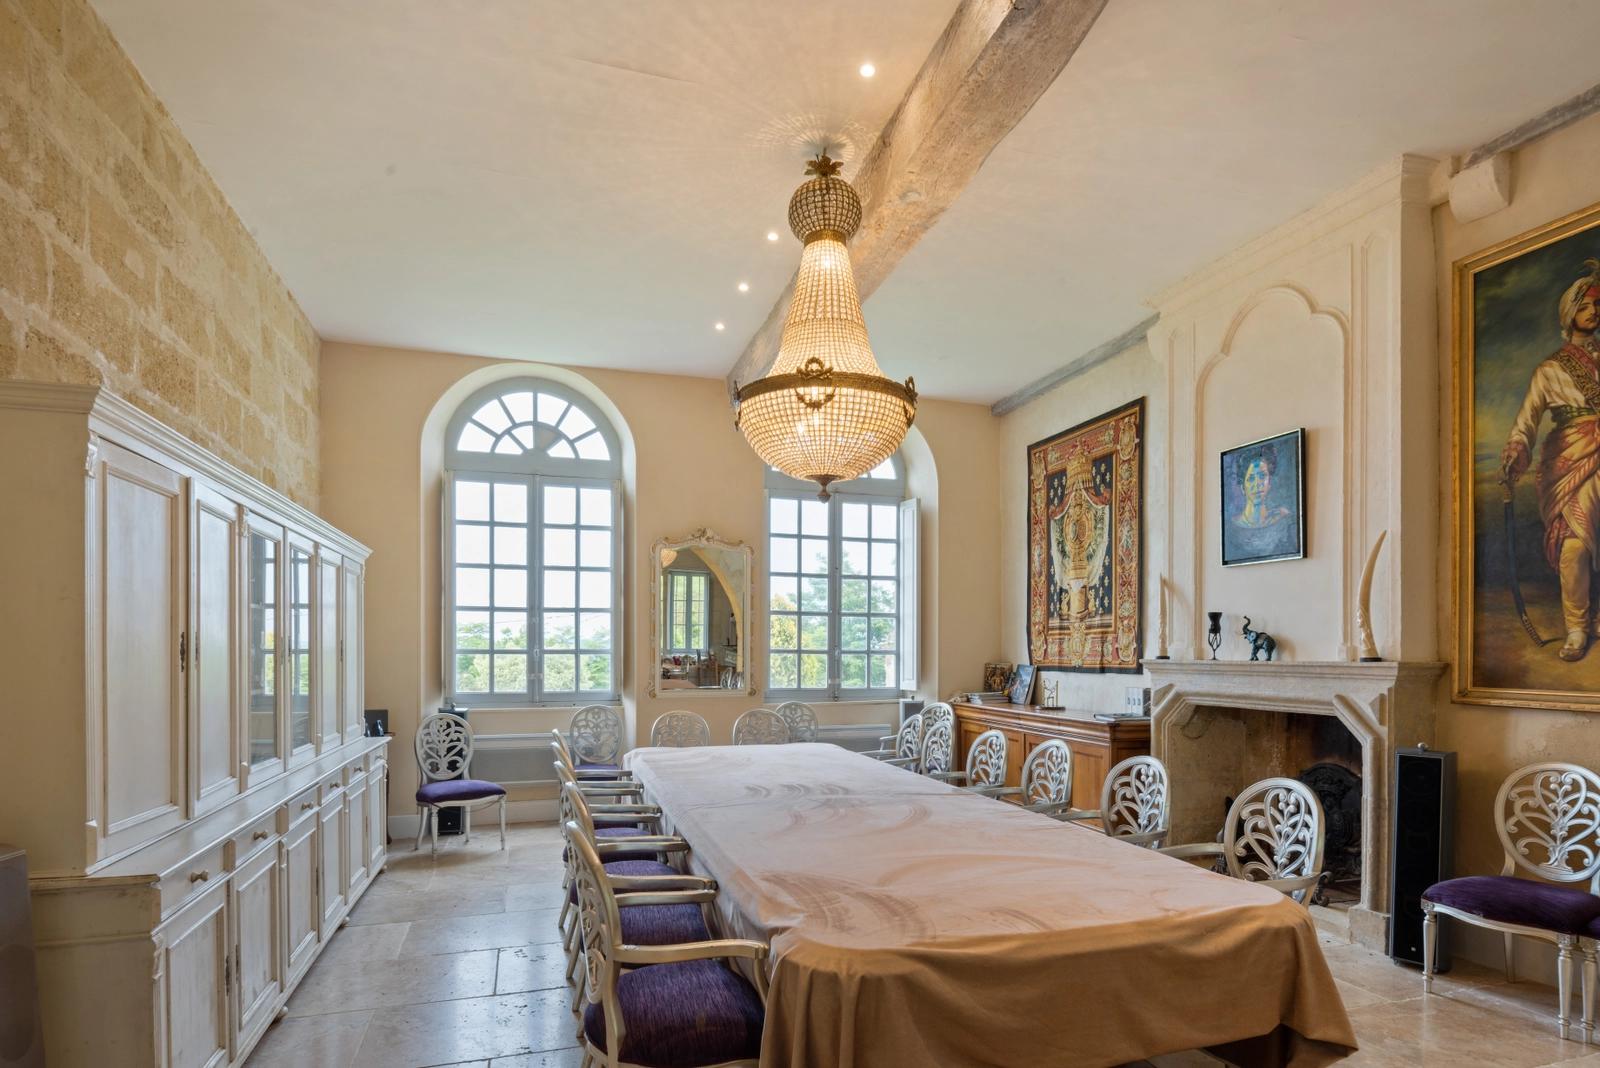 Bedroom in 12th century chateau, wine producer - 1